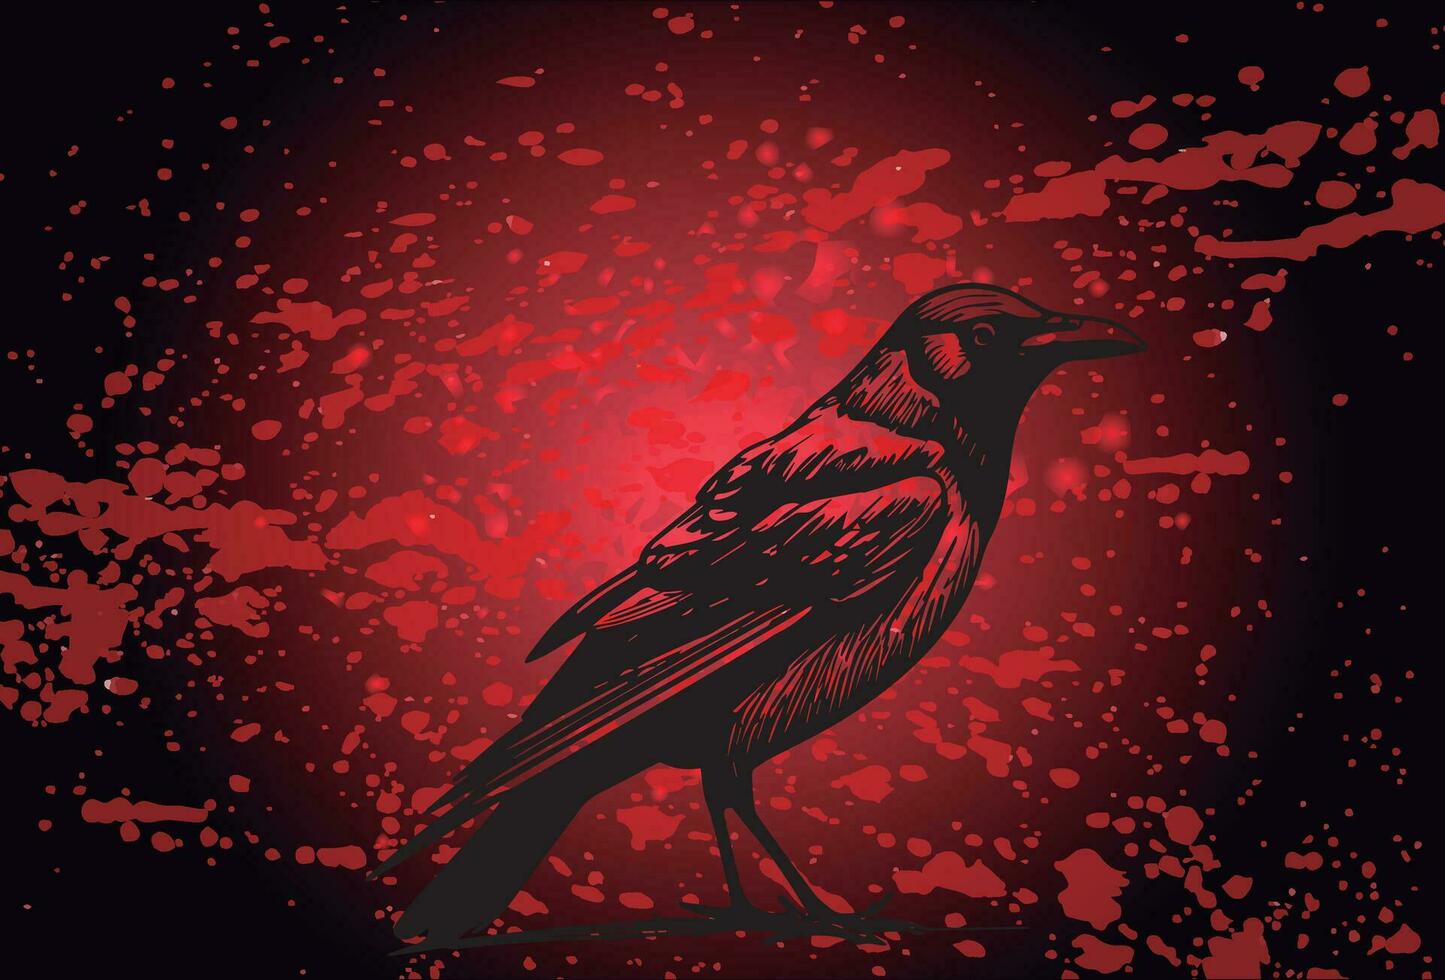 Raven - Illustration with Blood Splatters on Black and Red Background vector